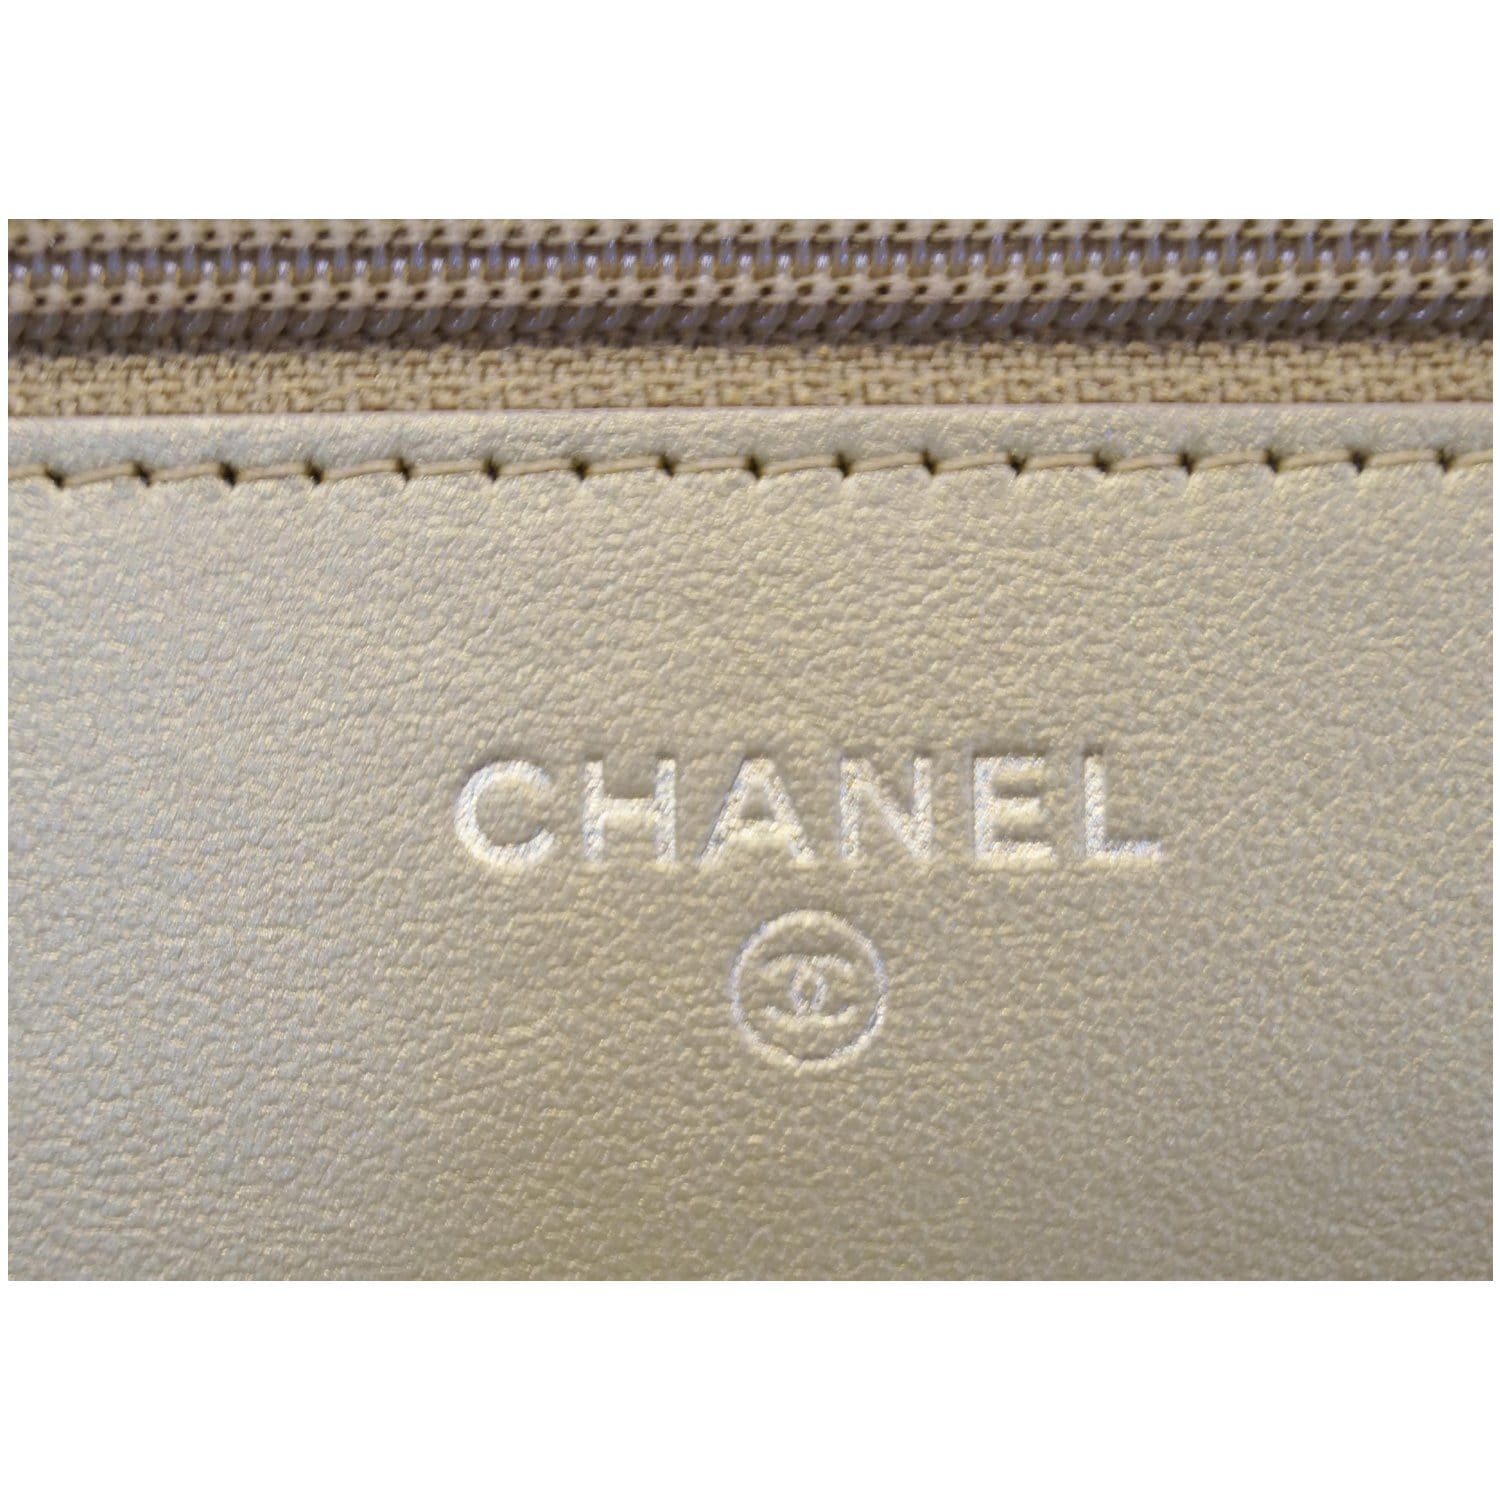 Chanel Wallet on Chain with Front Pocket, Black Caviar Leather with Gold  hardware, New in Box GA001 - Julia Rose Boston